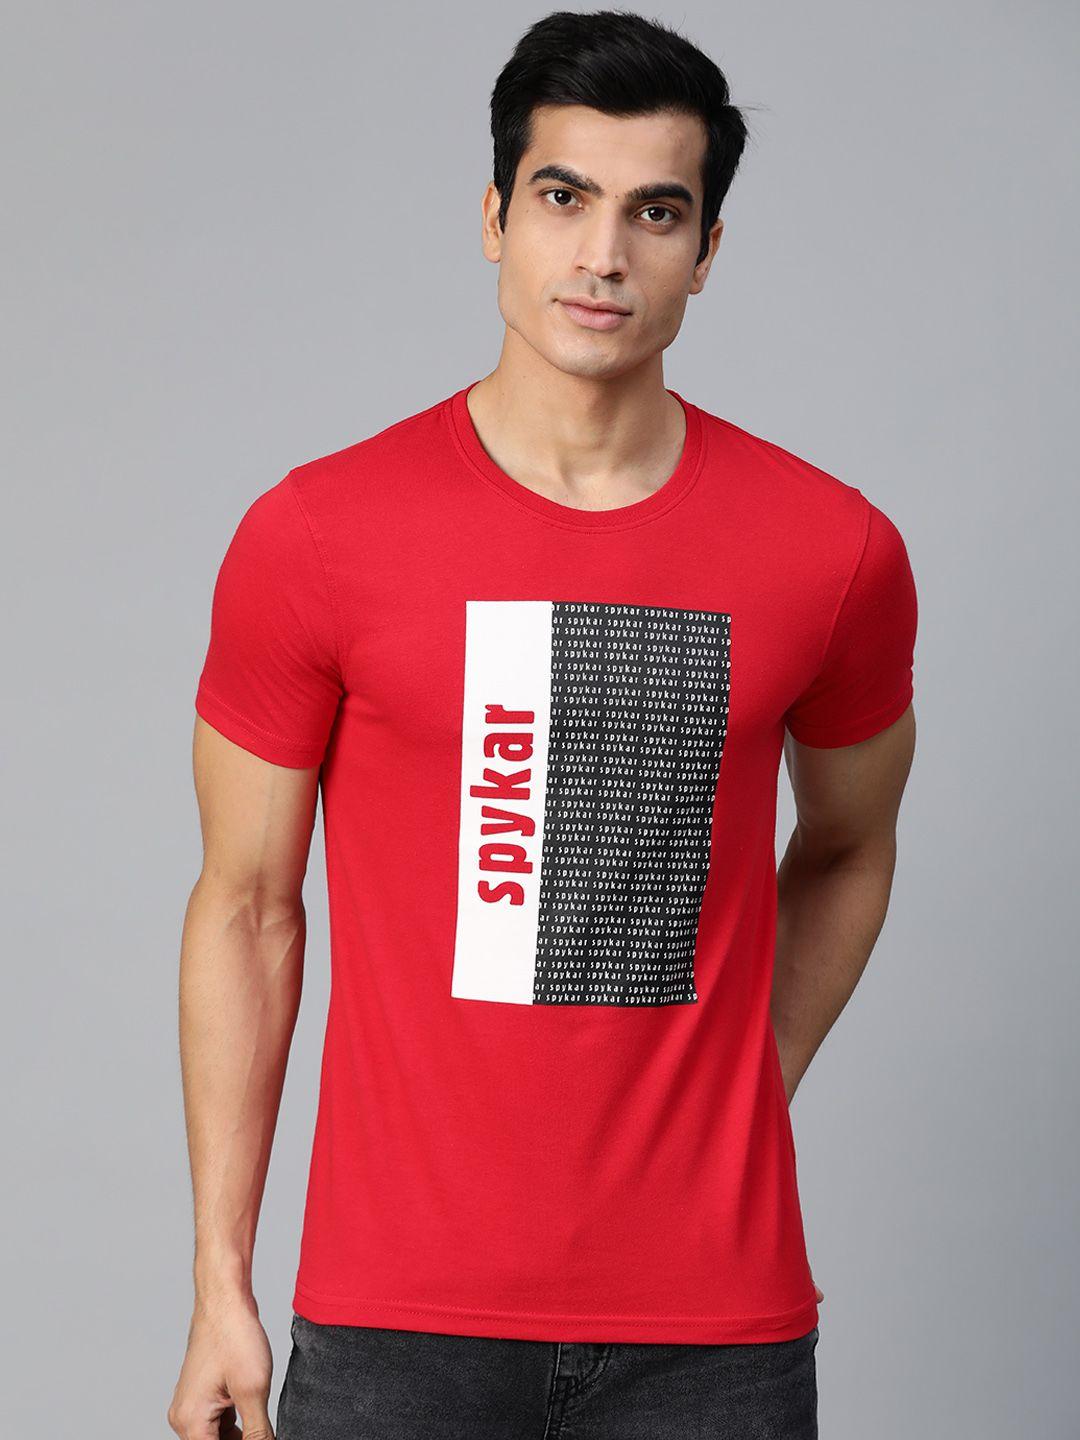 underjeans-by-spykar-men-red-printed-round-neck-t-shirt